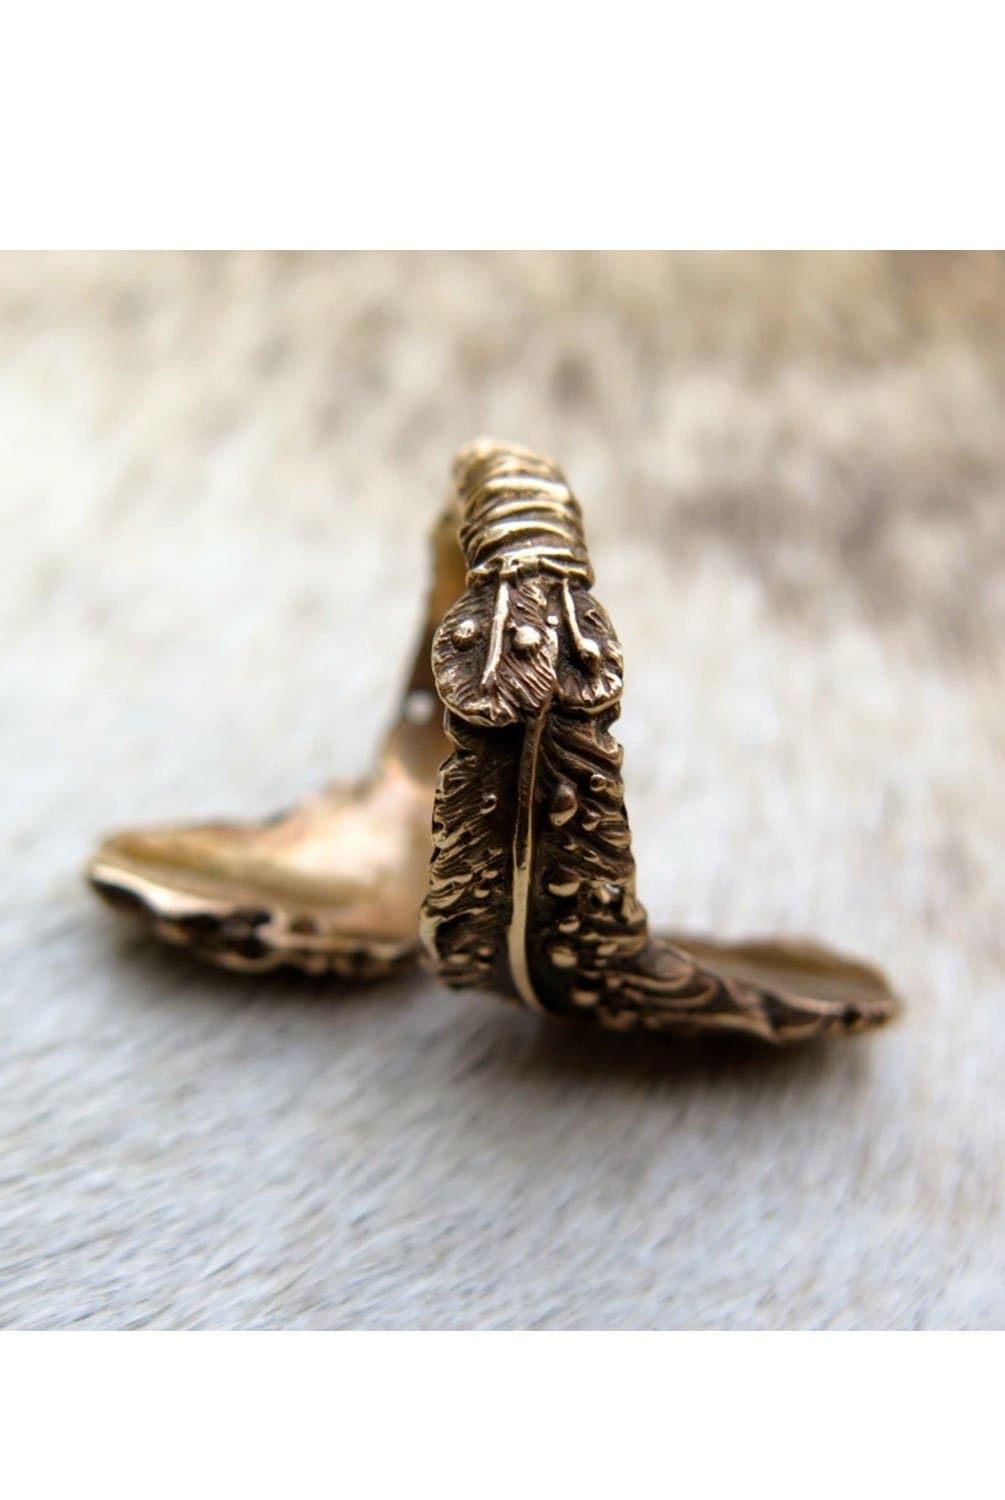 Wanderlust + Wildhearts Jewelry Feather Wrap Ring